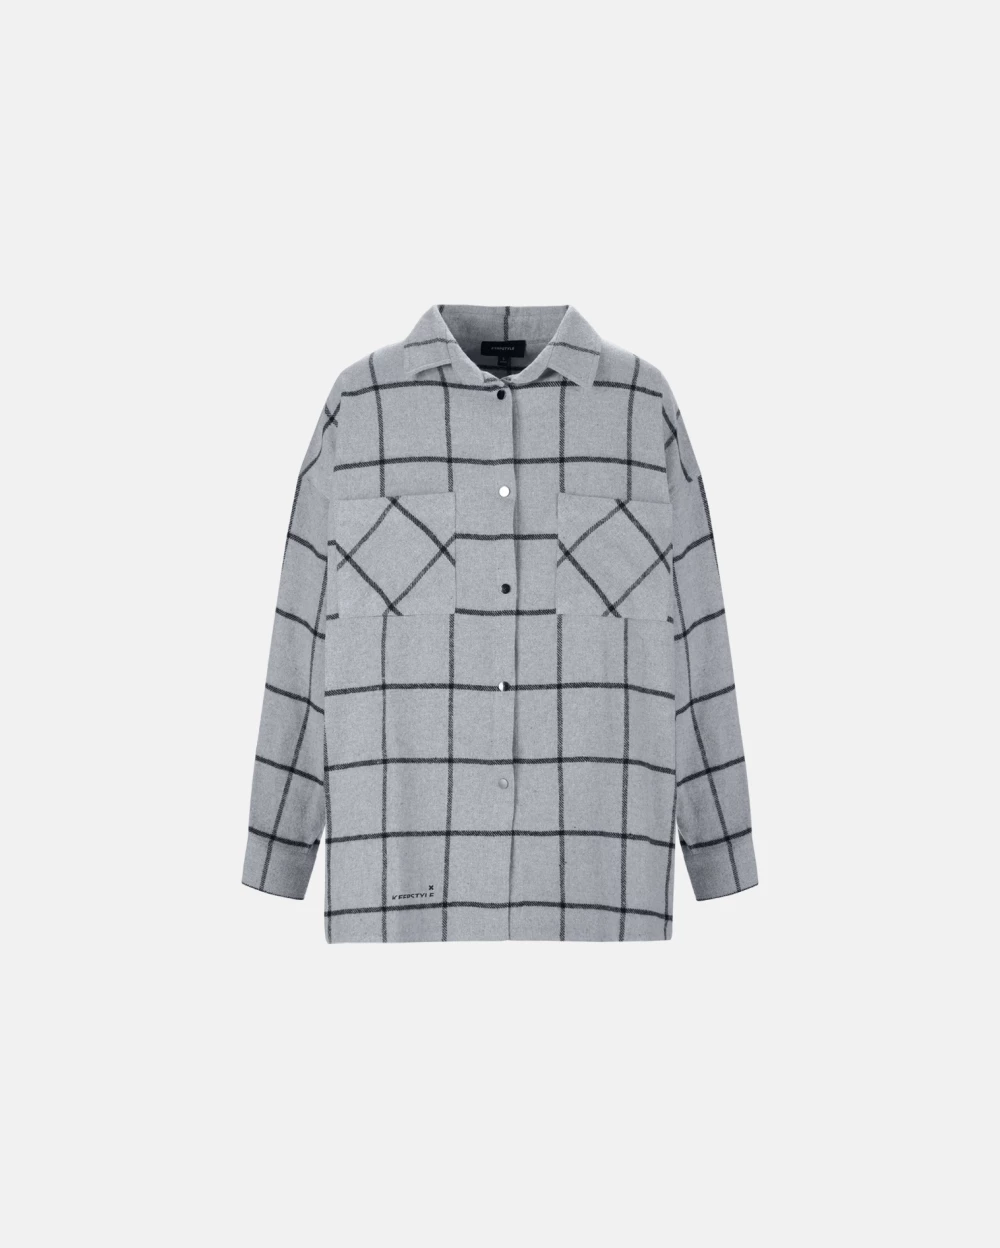 shirt X in gray color